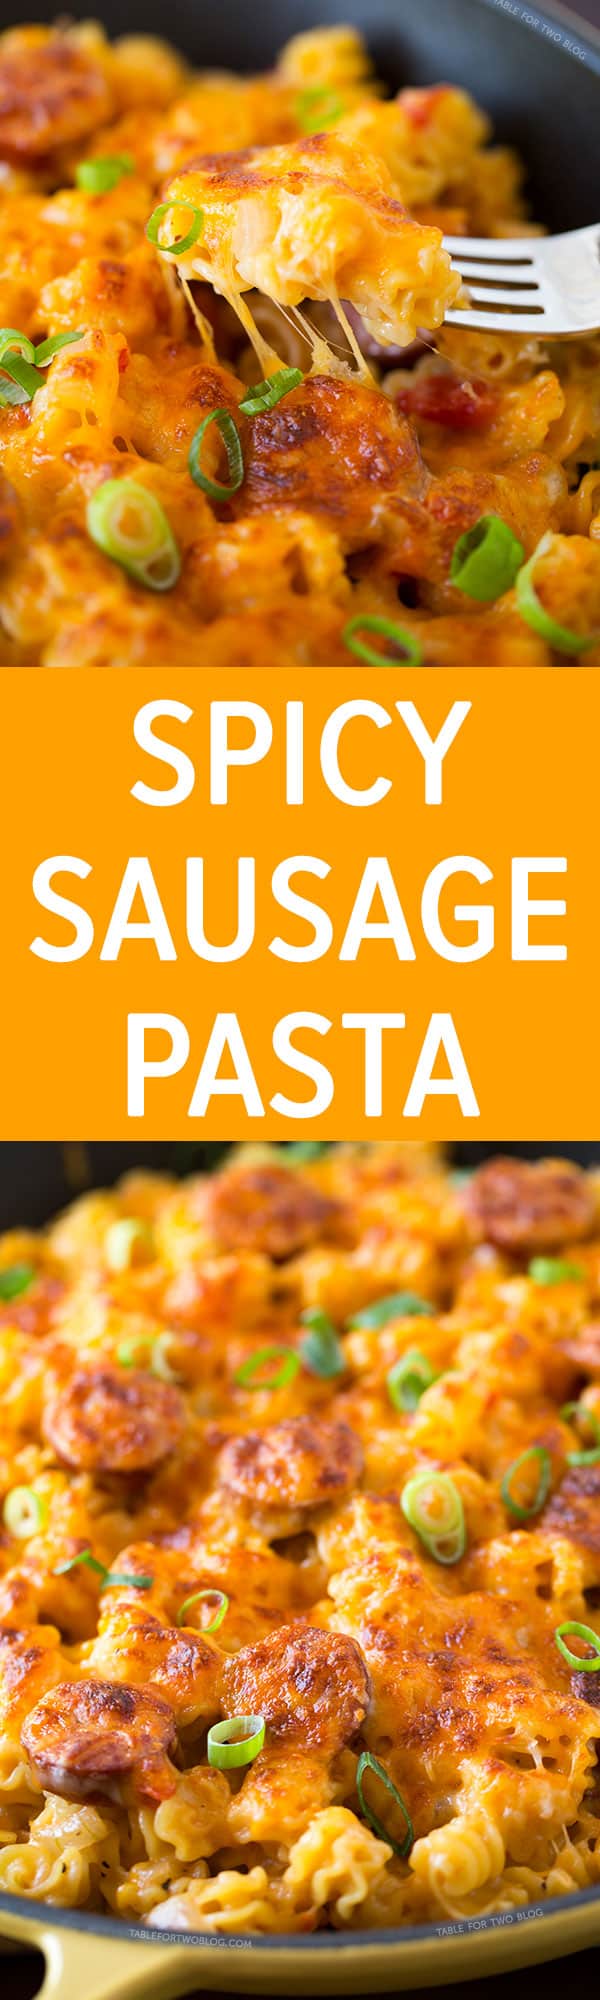 This spicy sausage pasta cooks in one pot and it's ready in no time! It's got so much flavor and a little kick at the end of every bite!